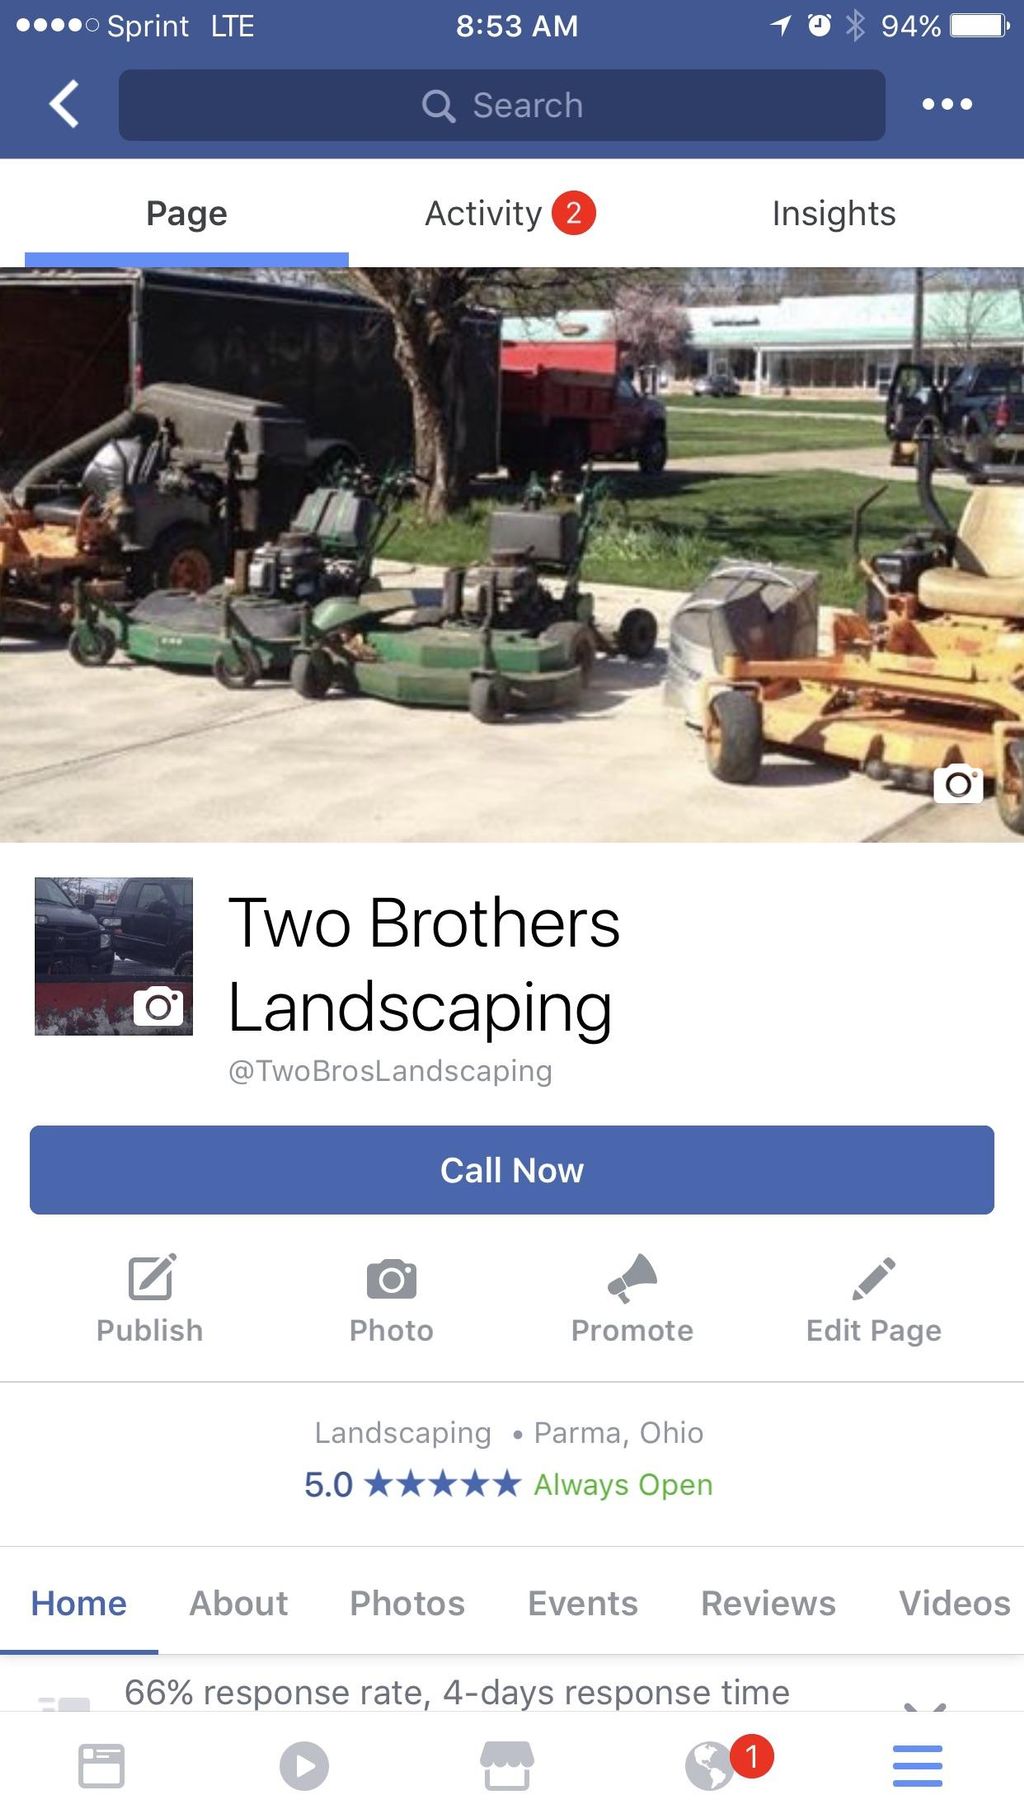 Two Brothers Landscaping